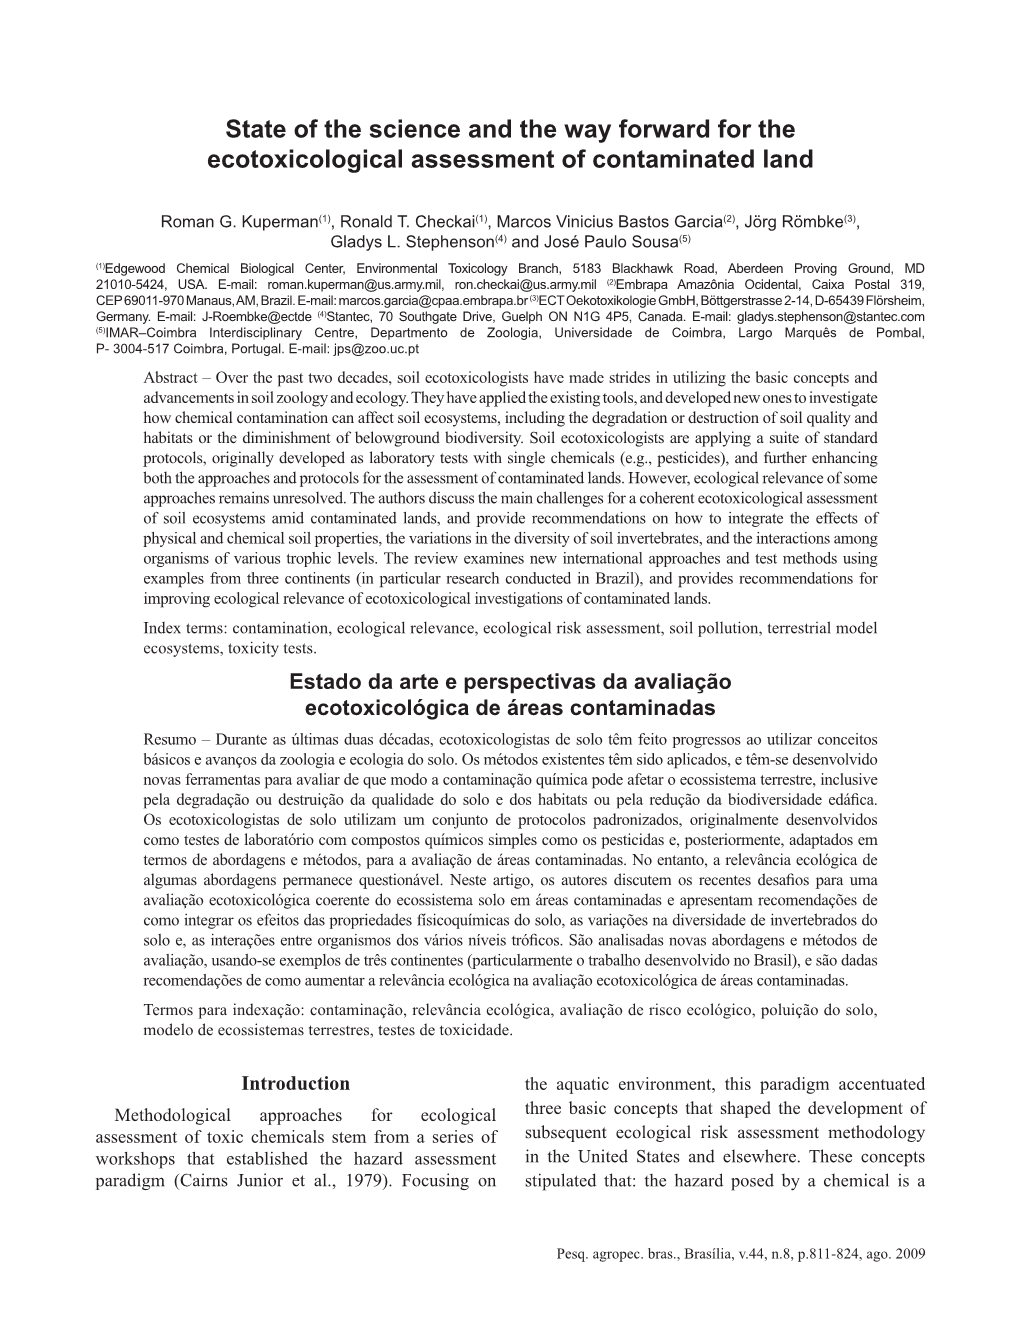 State of the Science and the Way Forward for the Ecotoxicological Assessment of Contaminated Land